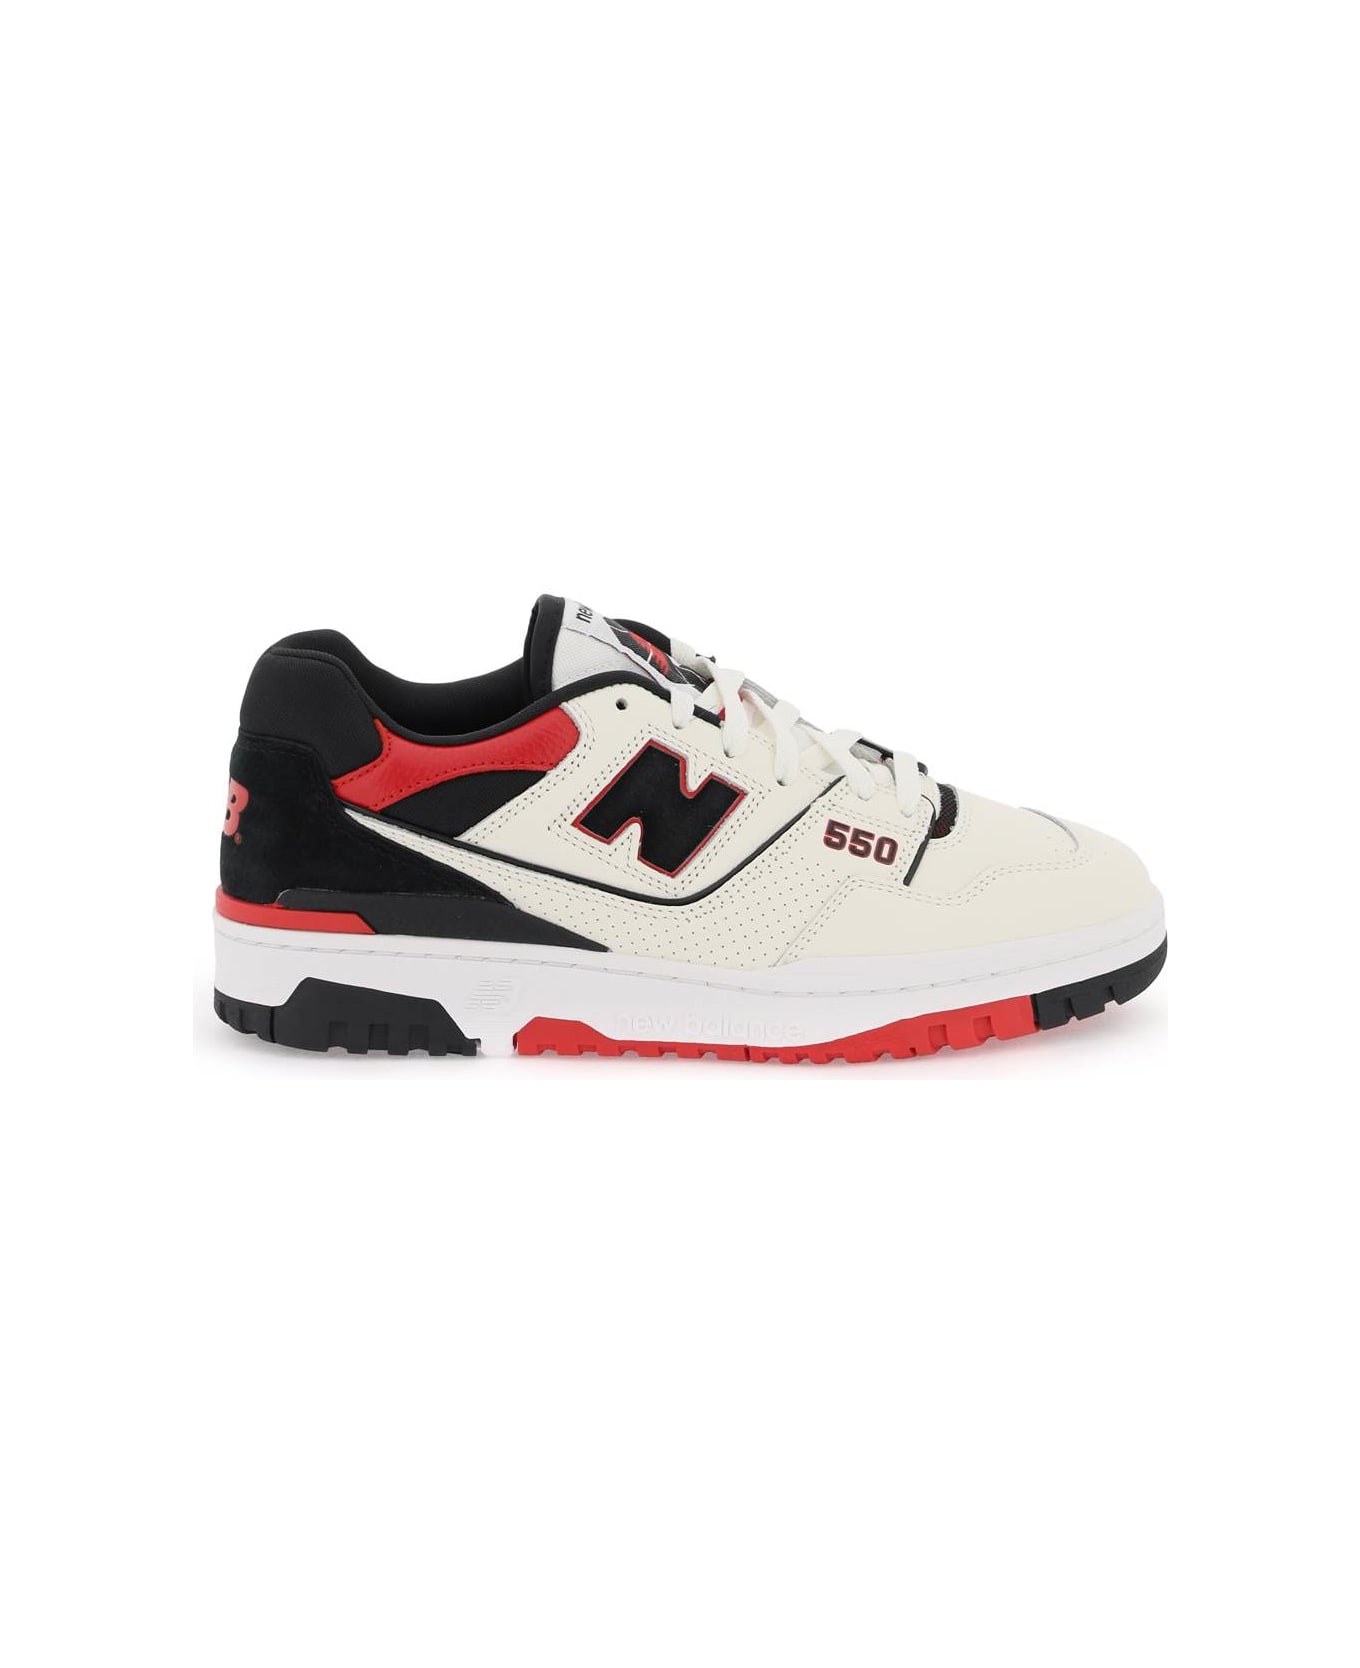 New Balance 550 Sneakers - WHITE RED (White)